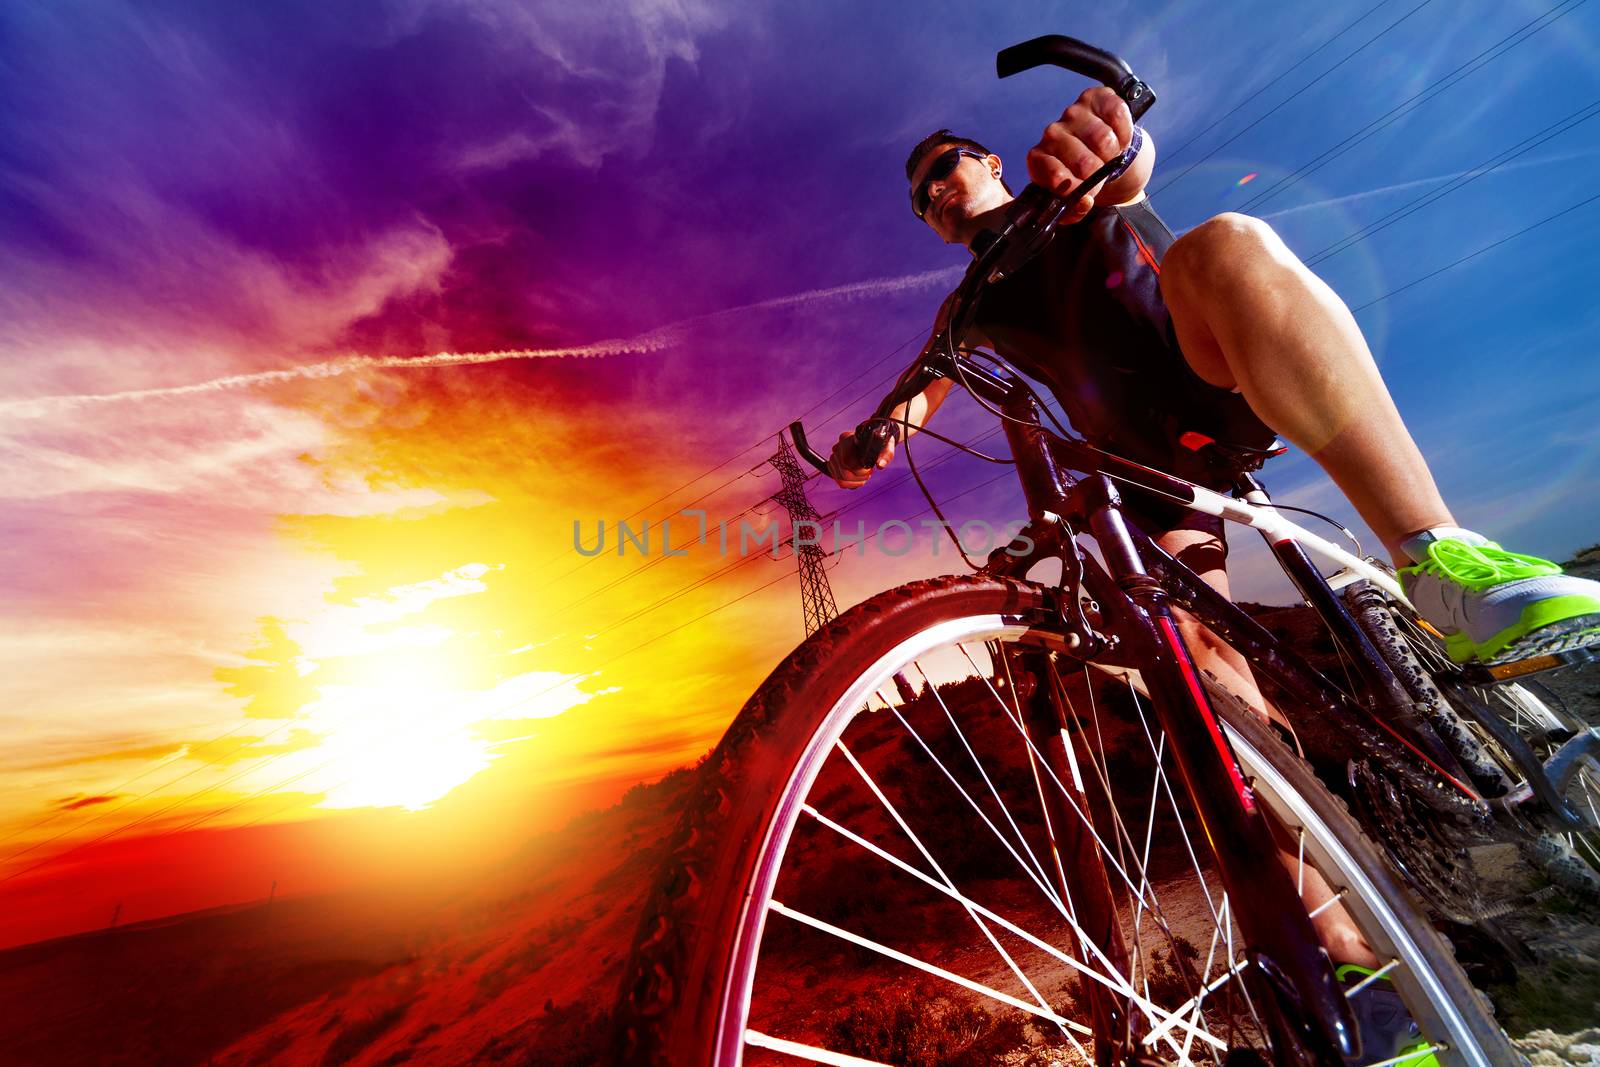 Sport and healthy life.Mountain bike and landscape background by carloscastilla